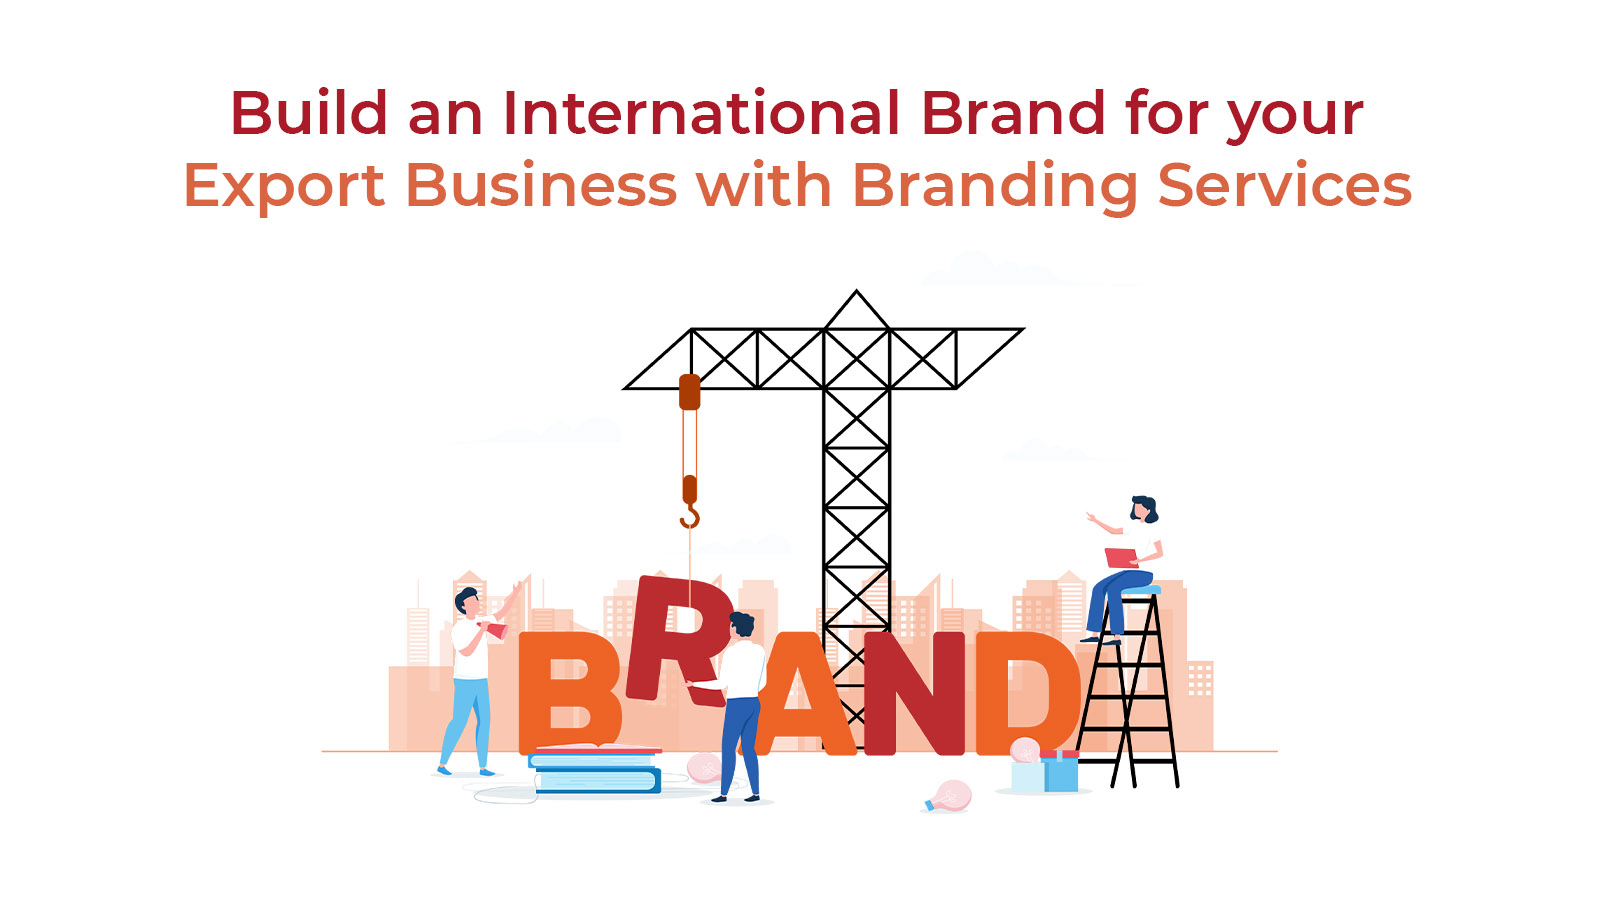 Build an International Brand for your Export Business with Branding Services